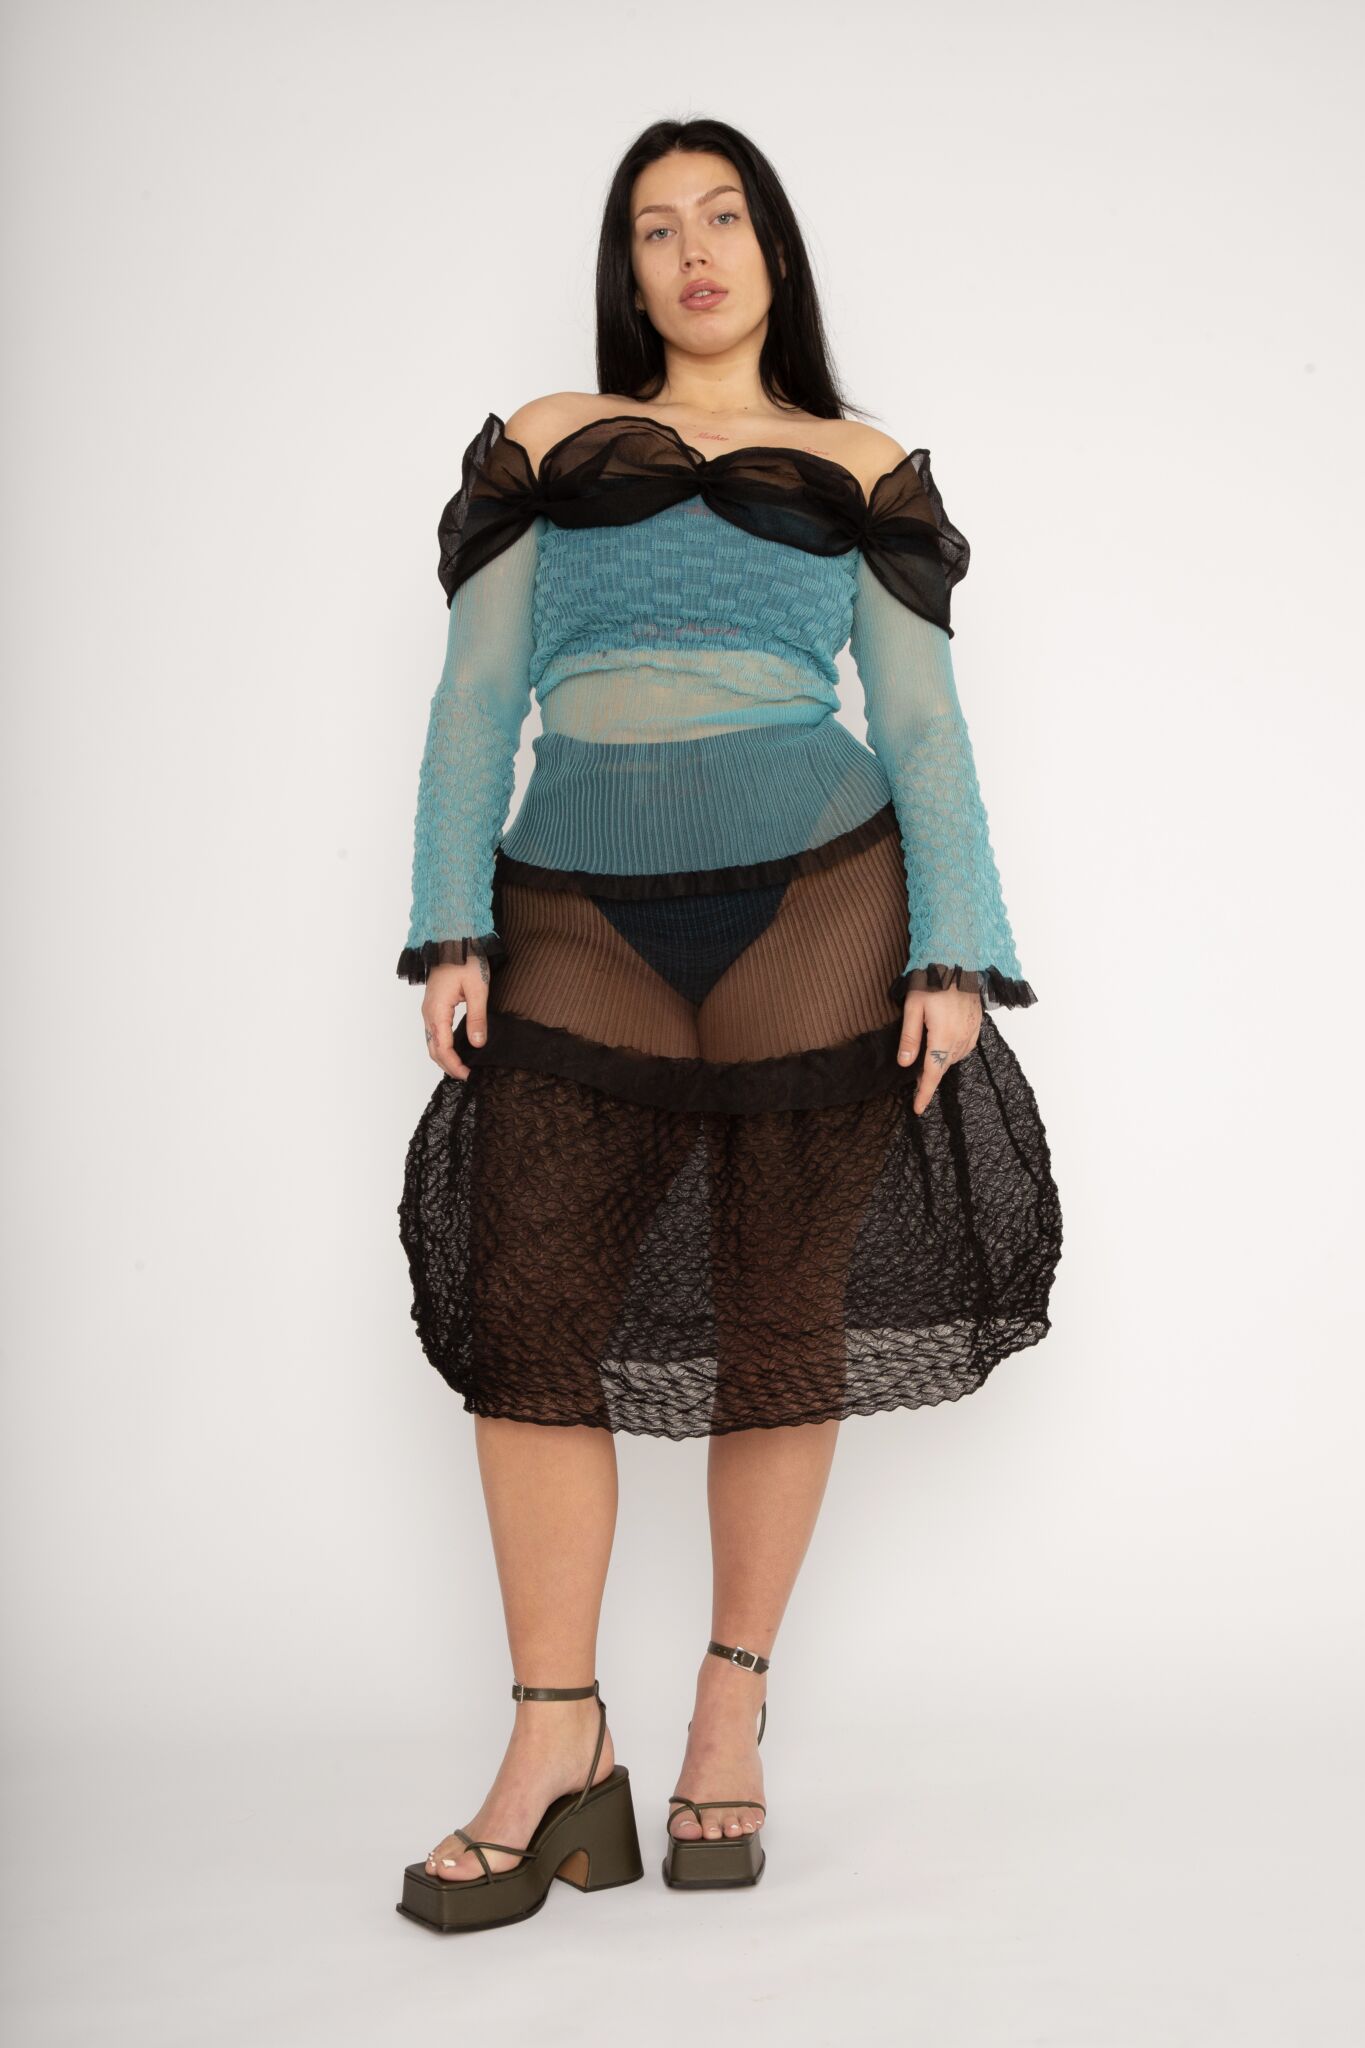 Bubble Bell Top in teal and black is a transparent knitted off-shoulder top in a ribbed bubble texture with ruffles and bell sleeves. The top has a close fit body with long sleeves and a voluminous adjustable neckline detailed with a melange rim with a logo in the back. The textile is lightweight, delicate and very flexible, meaning the dress adapts to body wearing it. The Bubble Bell Top is also available in khaki and comes in 2 different sizes.